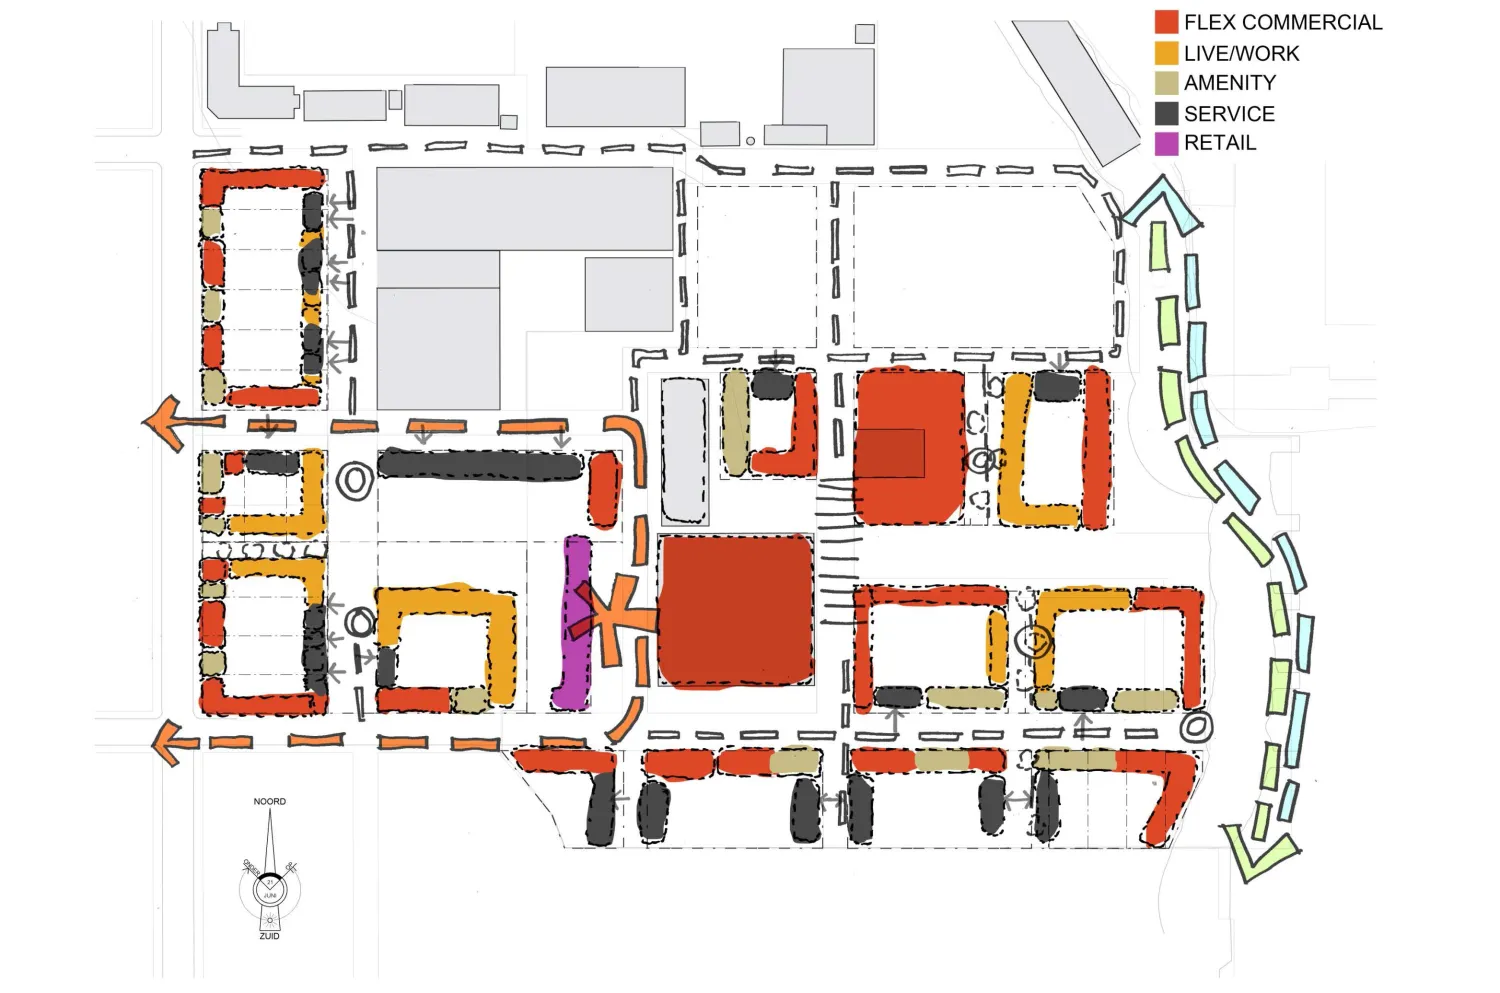 Site plan showing the active ground floor for Pier 70 in San Francisco.